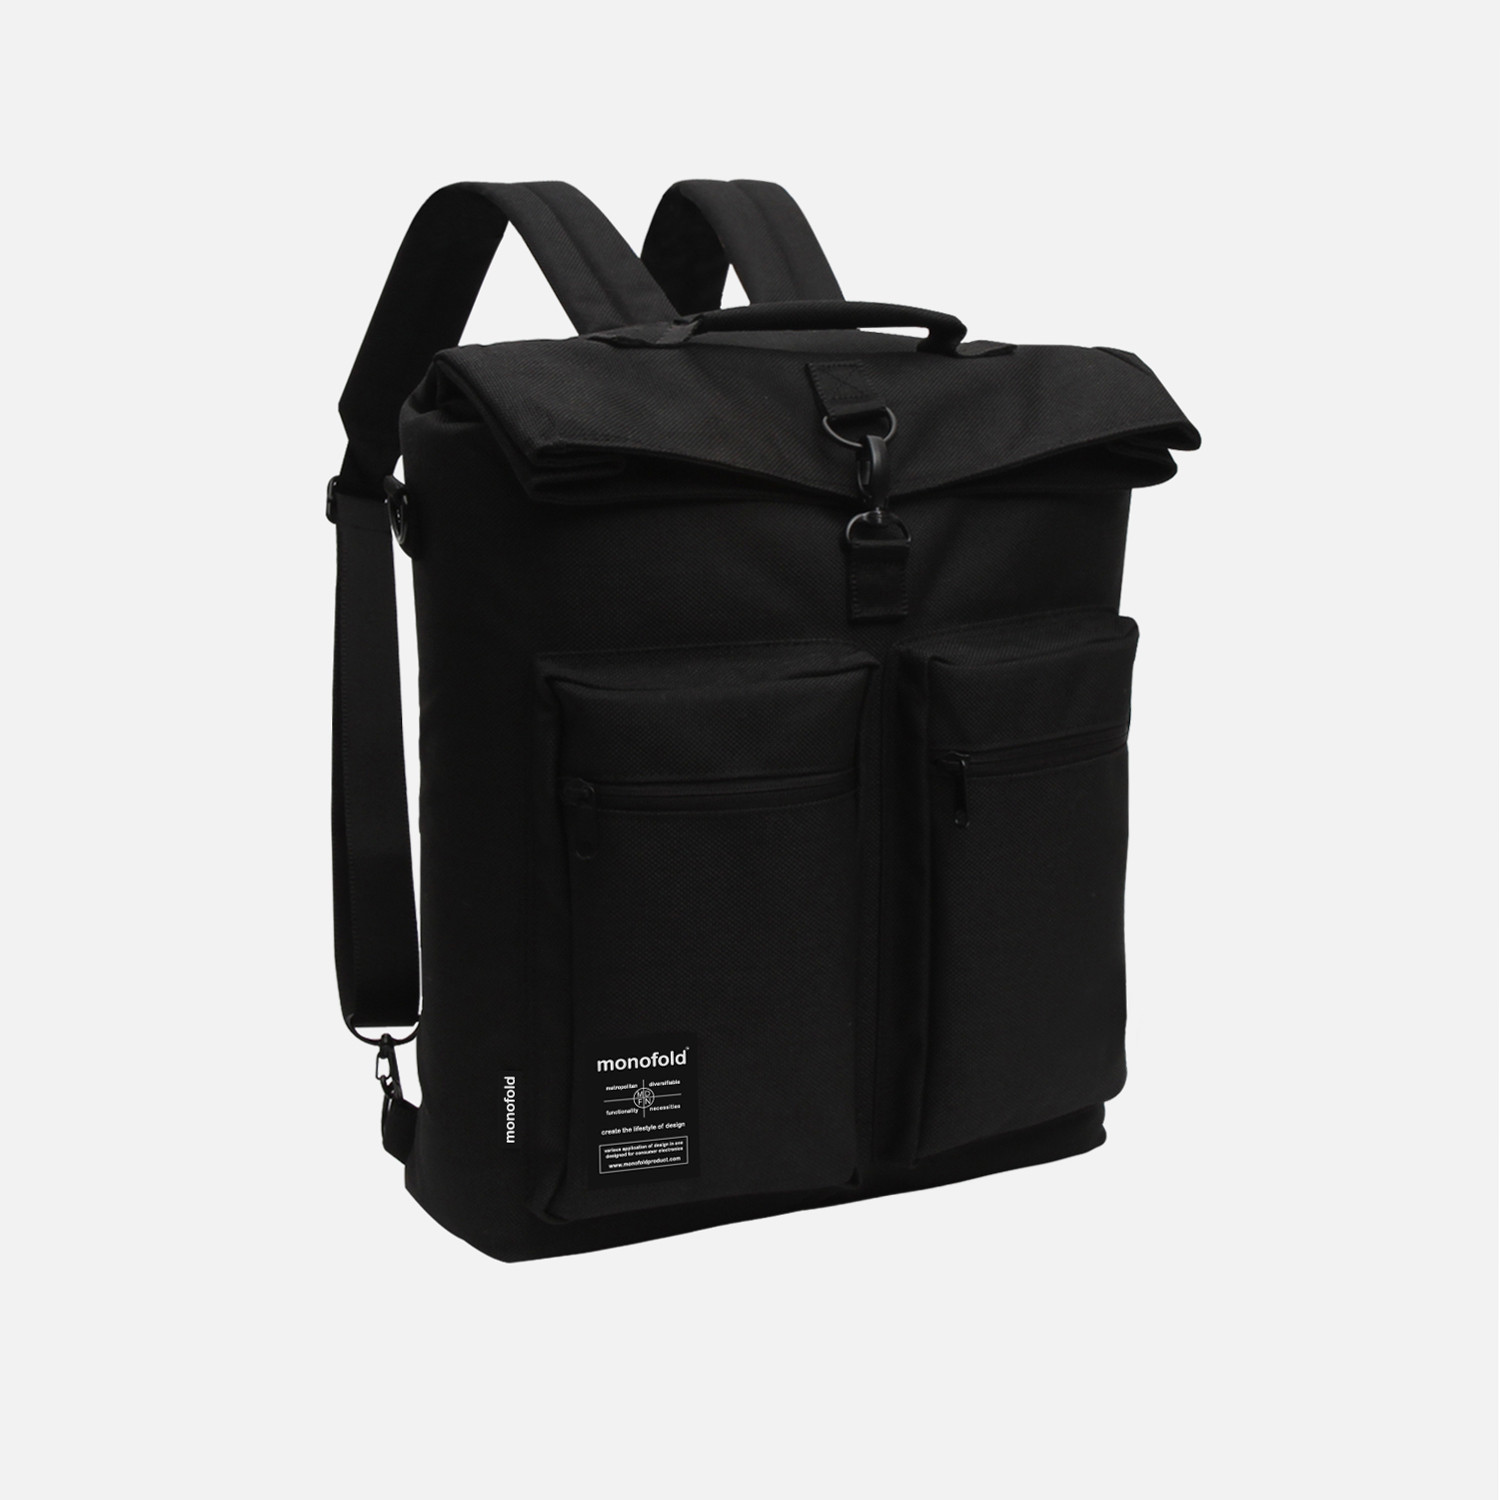 City Playbag (Black) - Monofold - Touch of Modern